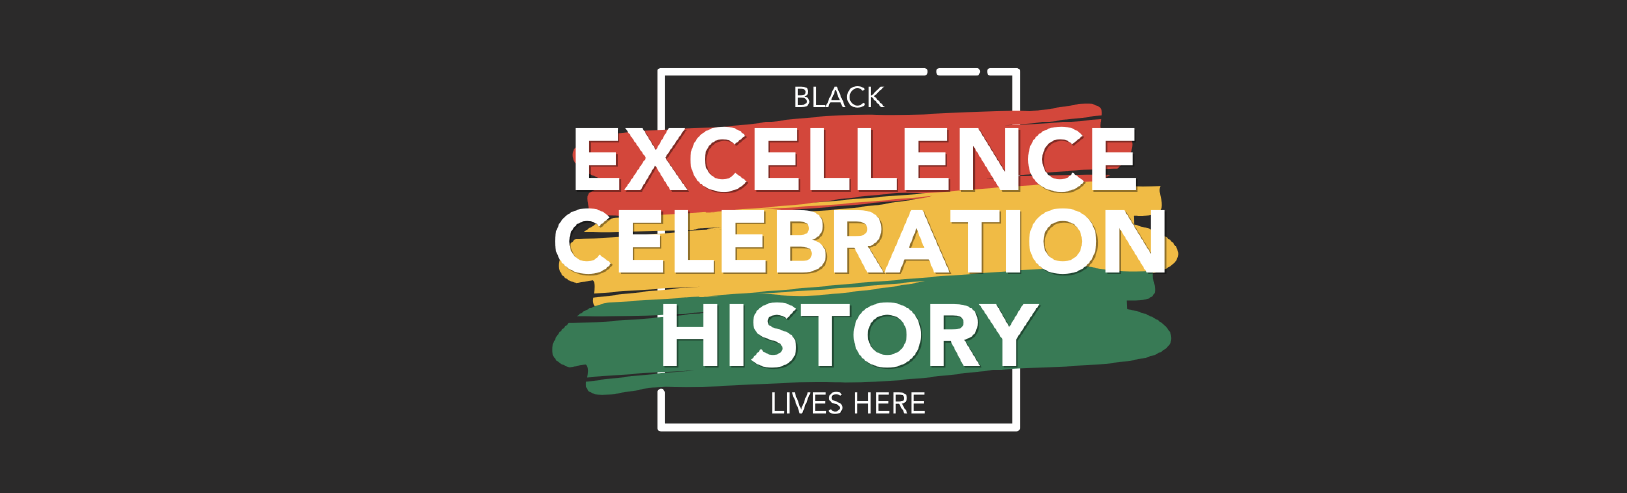 Black Excellence, Celebration and History Lives Here